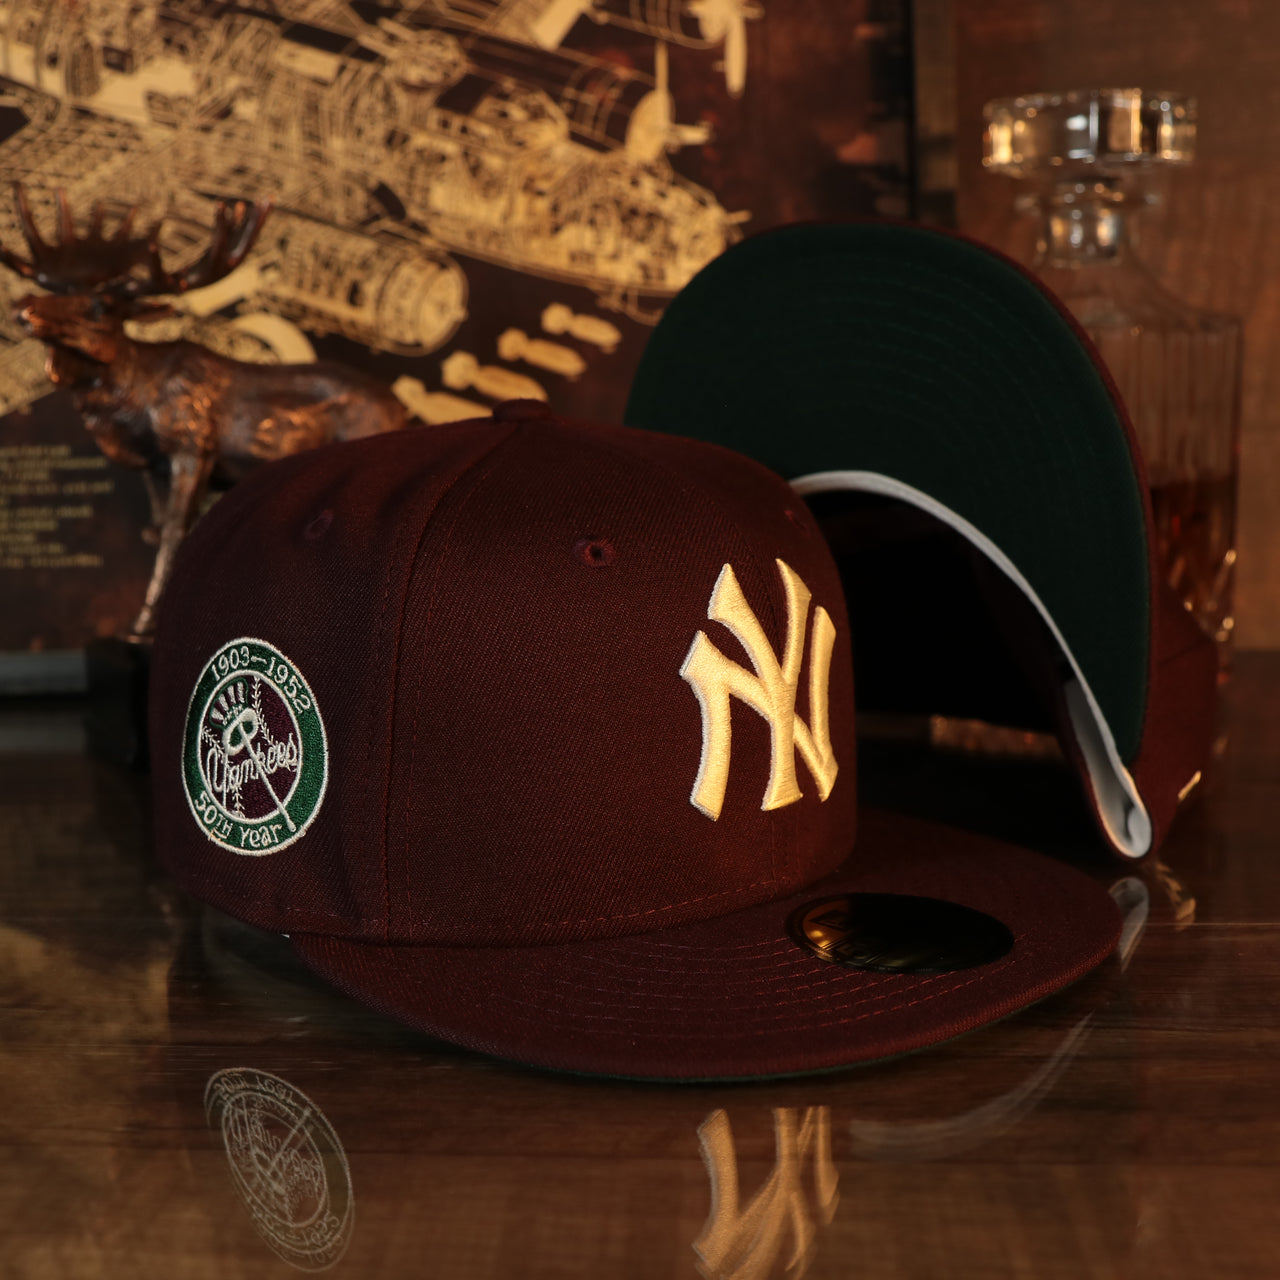 New York Yankees Cooperstown 50th Year Side Patch Dark Green UV 59Fifty Fitted Cap | Vintage Christmas Movie Pack